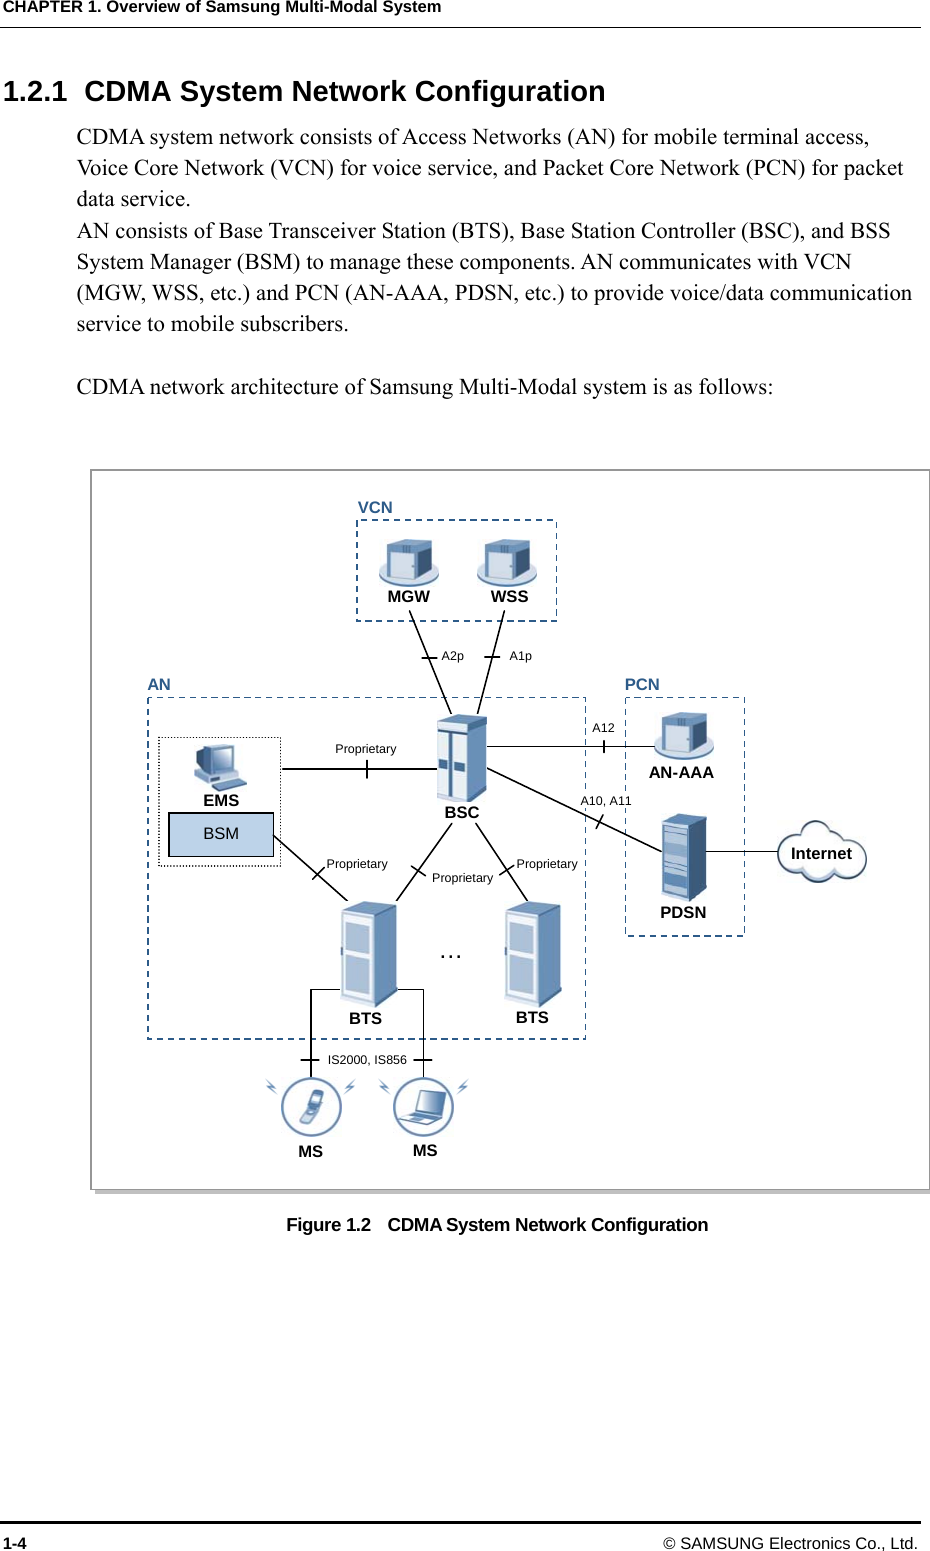 CHAPTER 1. Overview of Samsung Multi-Modal System 1-4 © SAMSUNG Electronics Co., Ltd. 1.2.1  CDMA System Network Configuration CDMA system network consists of Access Networks (AN) for mobile terminal access, Voice Core Network (VCN) for voice service, and Packet Core Network (PCN) for packet data service.   AN consists of Base Transceiver Station (BTS), Base Station Controller (BSC), and BSS System Manager (BSM) to manage these components. AN communicates with VCN (MGW, WSS, etc.) and PCN (AN-AAA, PDSN, etc.) to provide voice/data communication service to mobile subscribers.    CDMA network architecture of Samsung Multi-Modal system is as follows:  Figure 1.2    CDMA System Network Configuration  MS  MS WSS MGW VCN AN-AAA PDSN Internet PCN A2p IS2000, IS856 Proprietary A12 A1p A10, A11 Proprietary EMS  BSC Proprietary BSM BTSAN Proprietary …BTS 